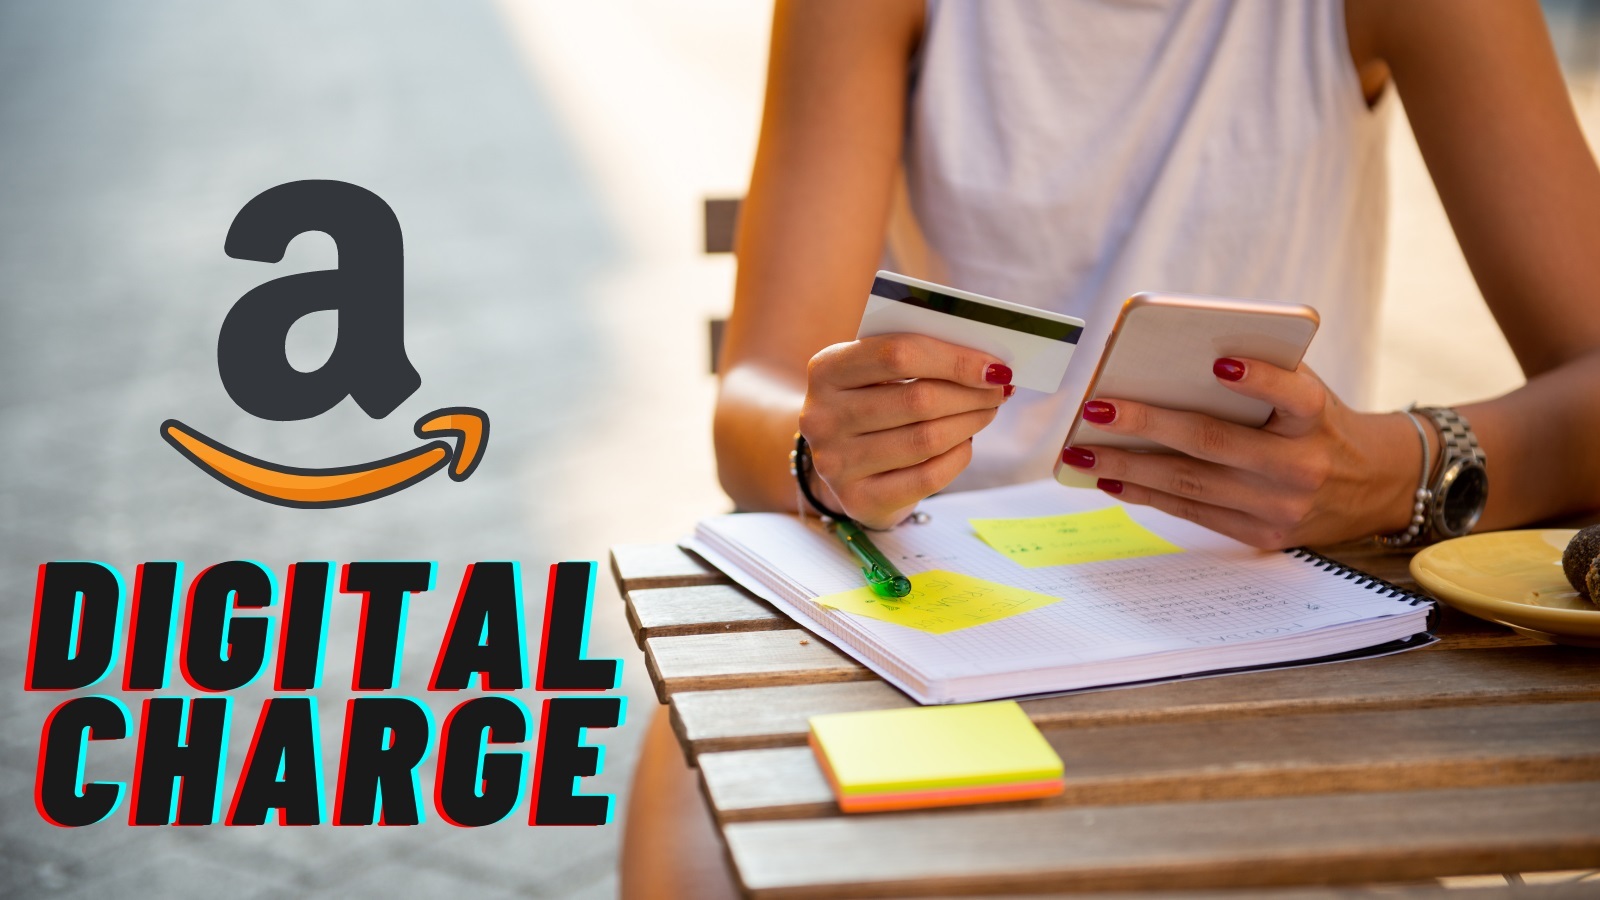 All You Need to Know about Amazon Digital Charge! Cherry Picks